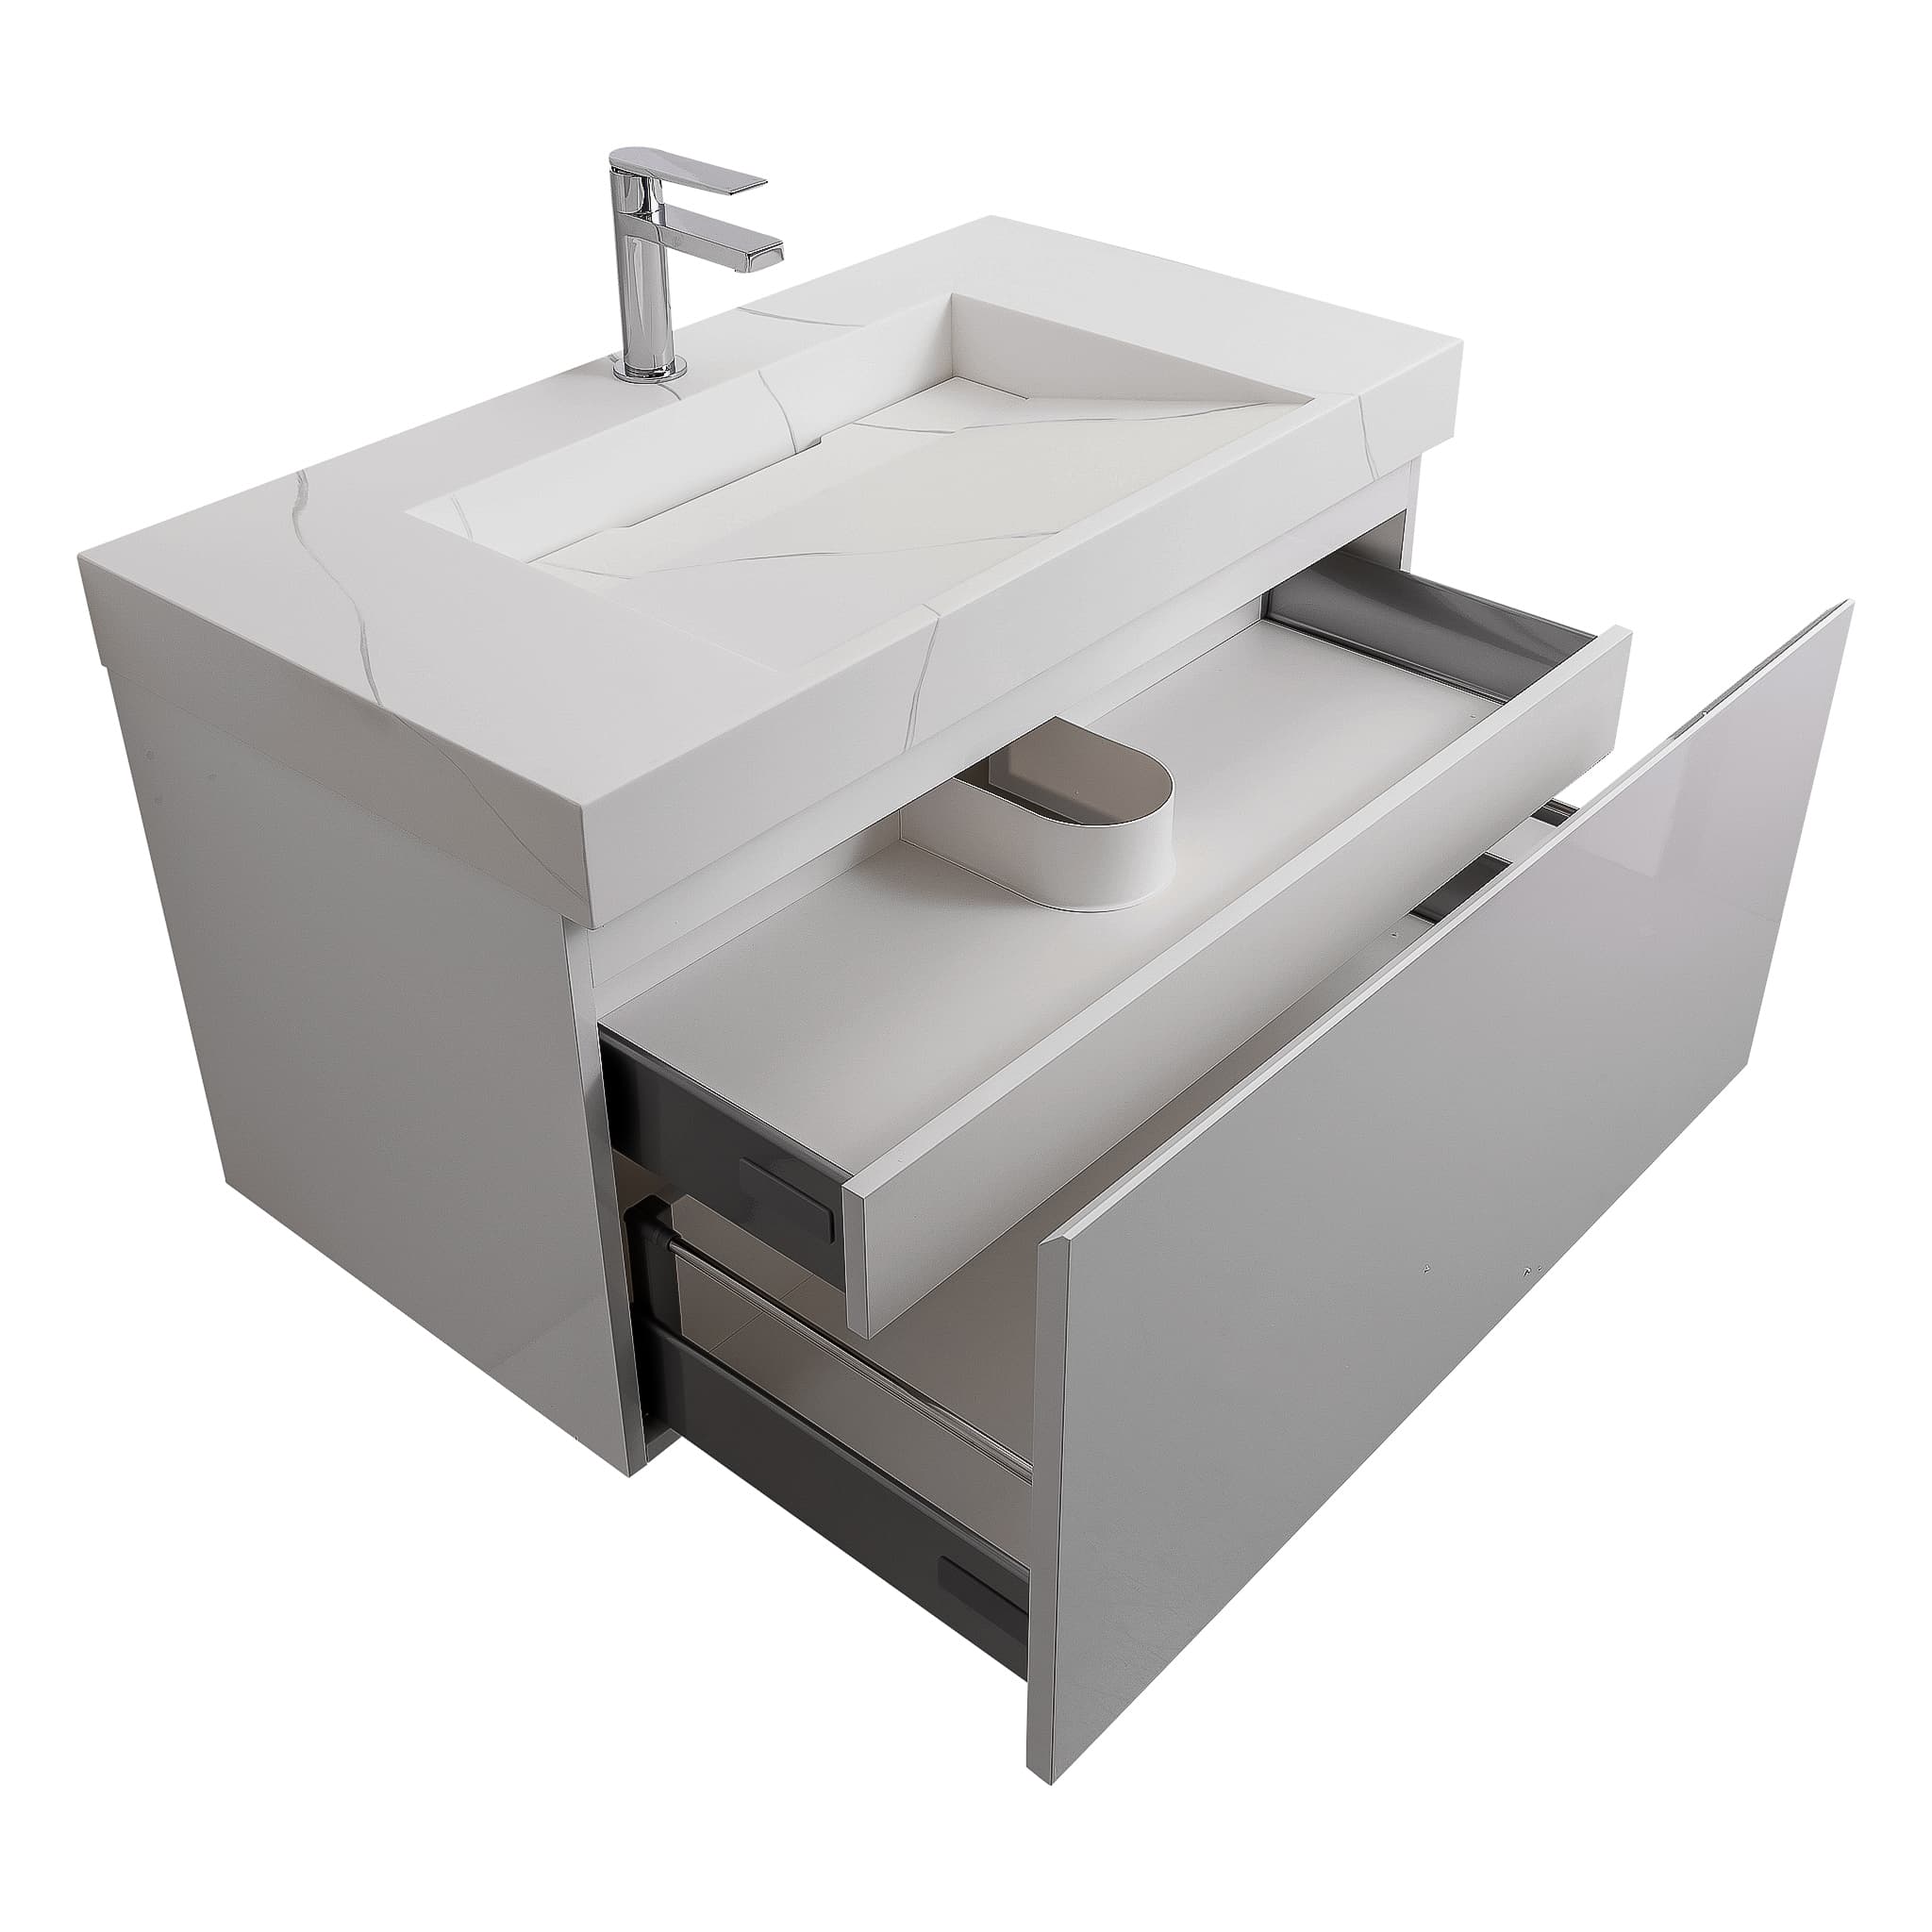 Venice 31.5 White High Gloss Cabinet, White Tempered Glass Sink, Wall Mounted Modern Vanity Set